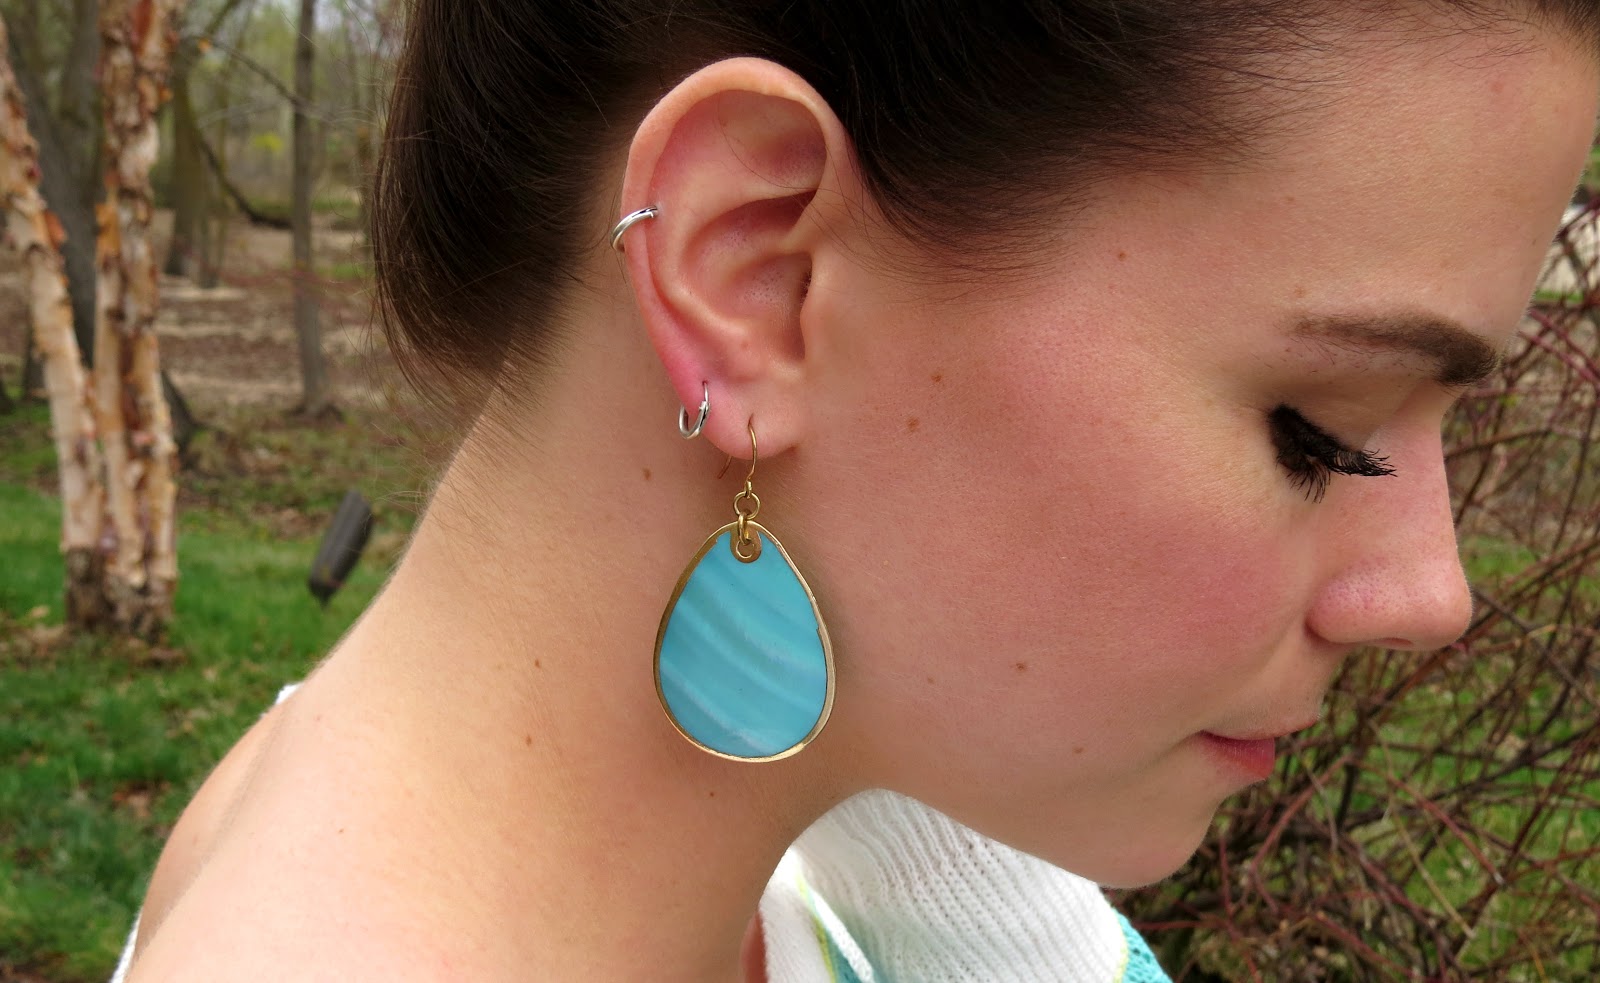 turquoise and gold earrings